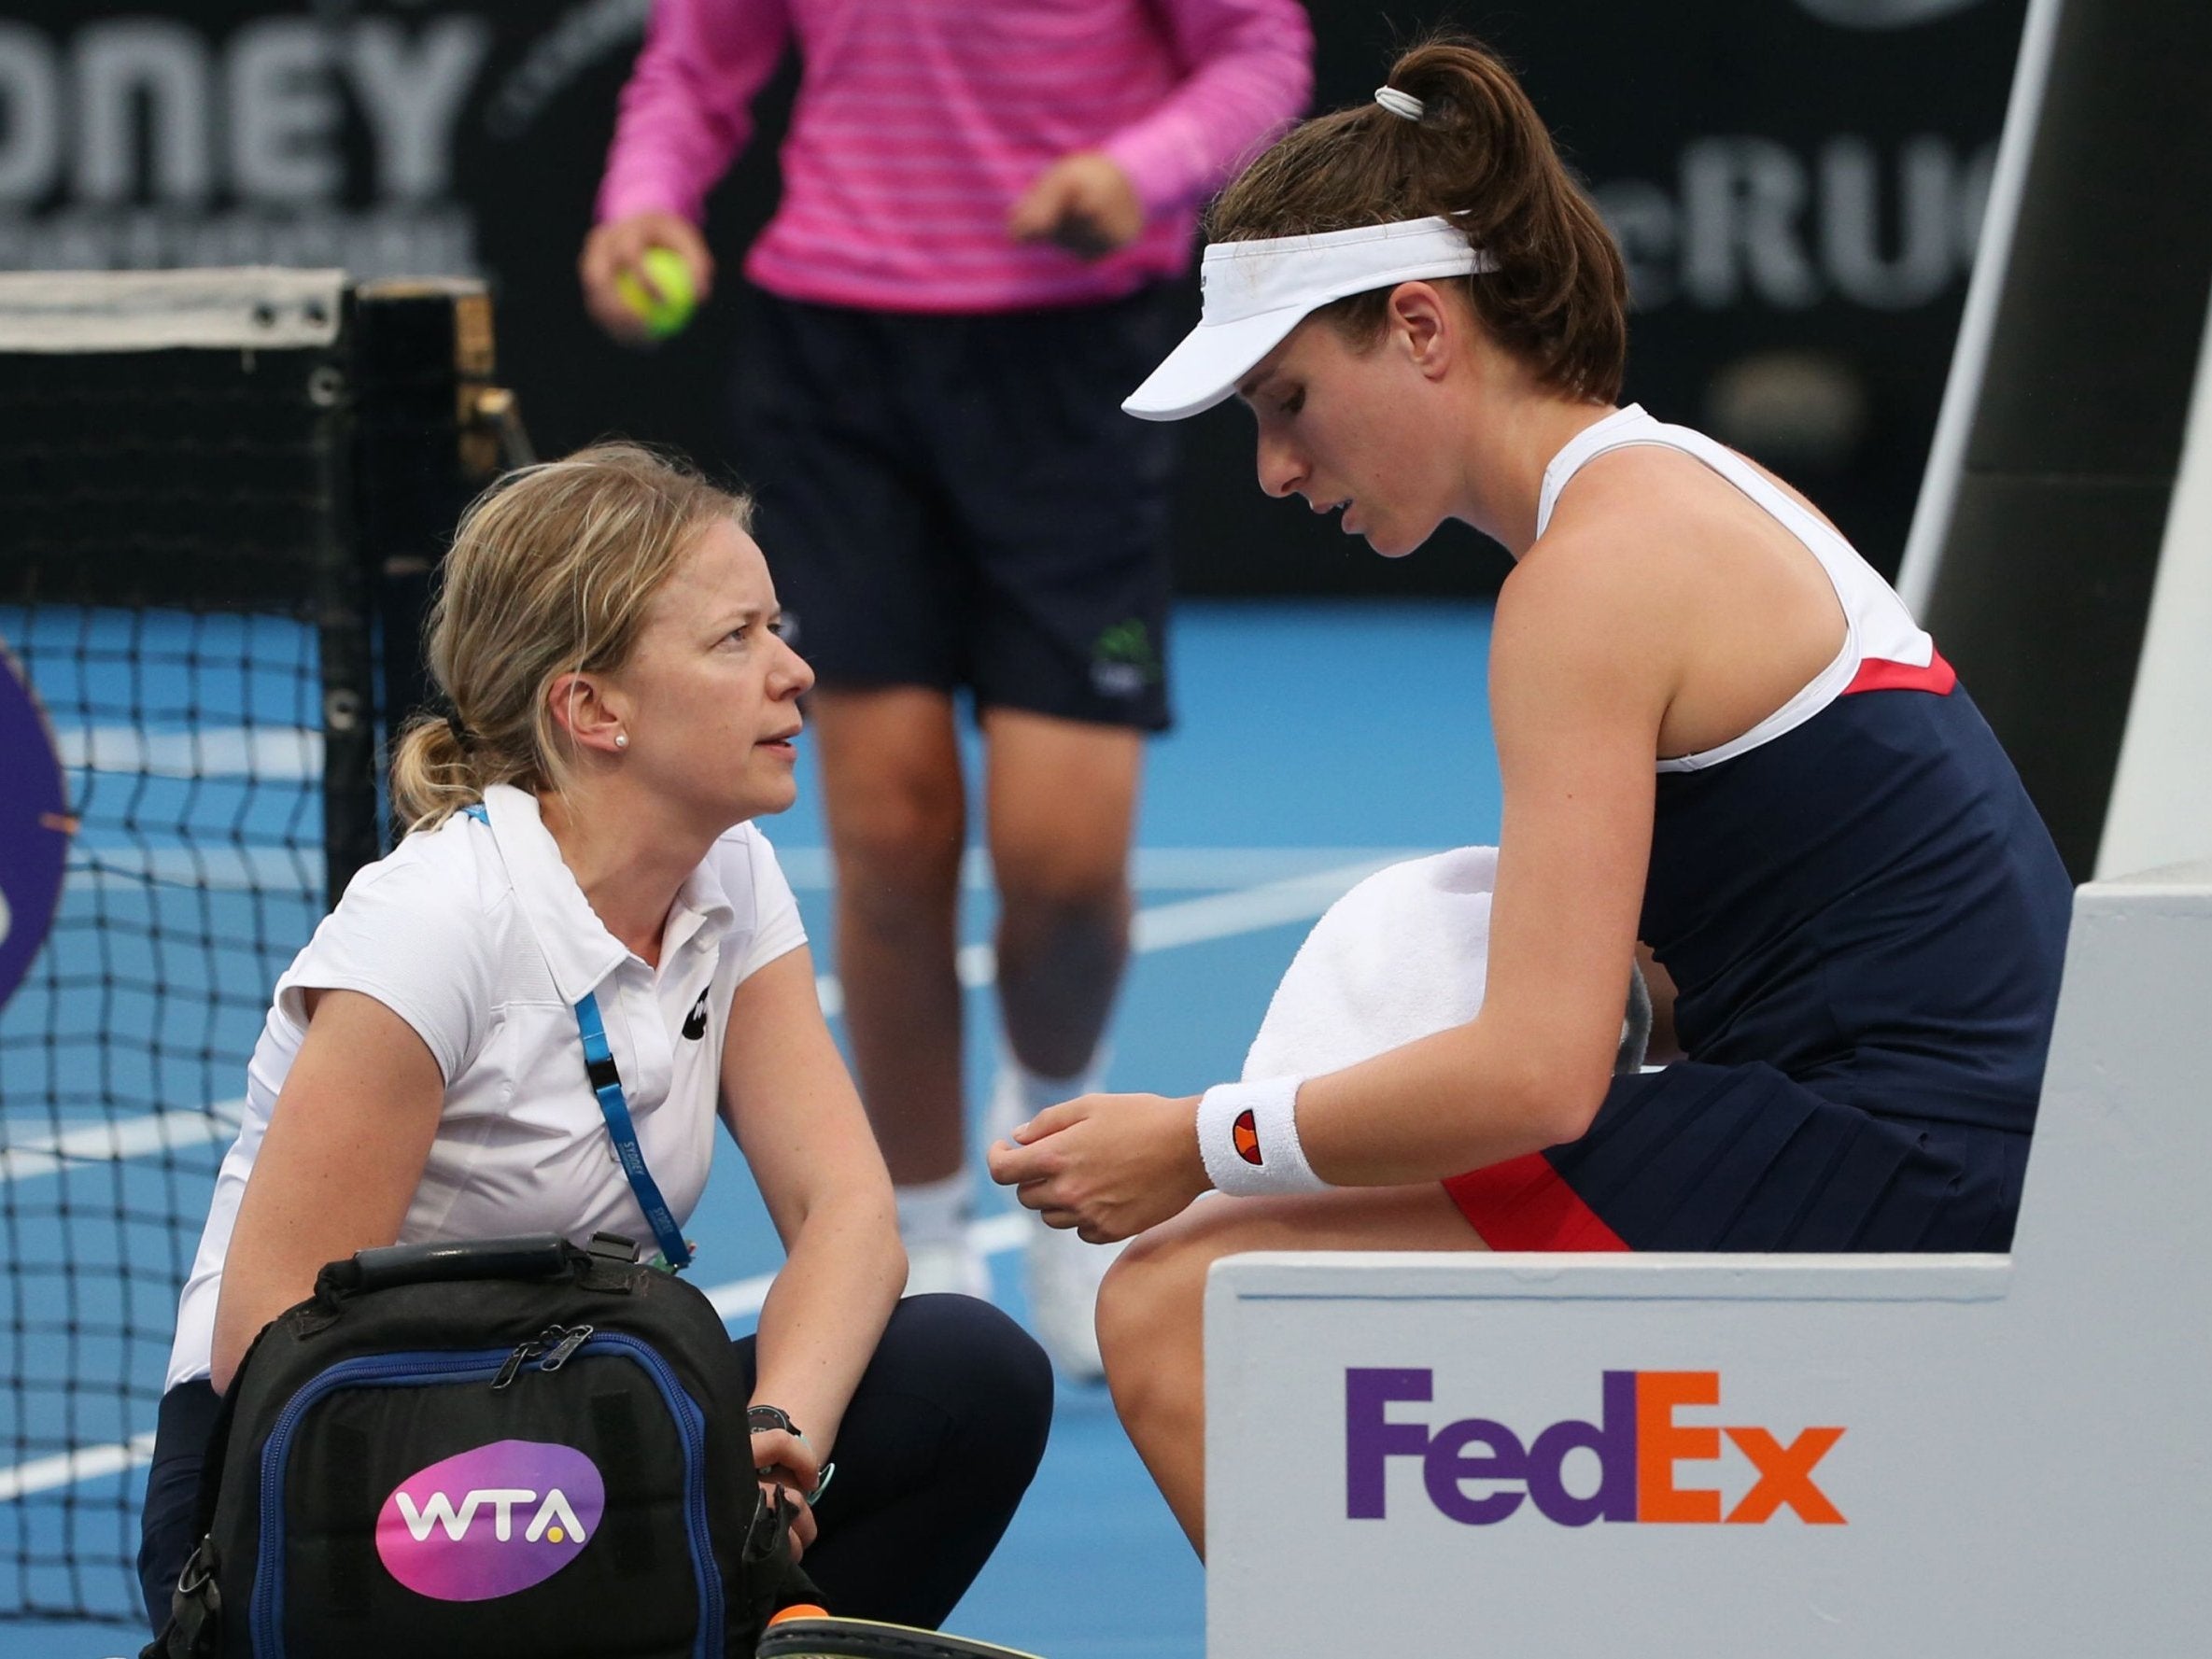 Konta had struggled in the run-up to the tournament in Melbourne